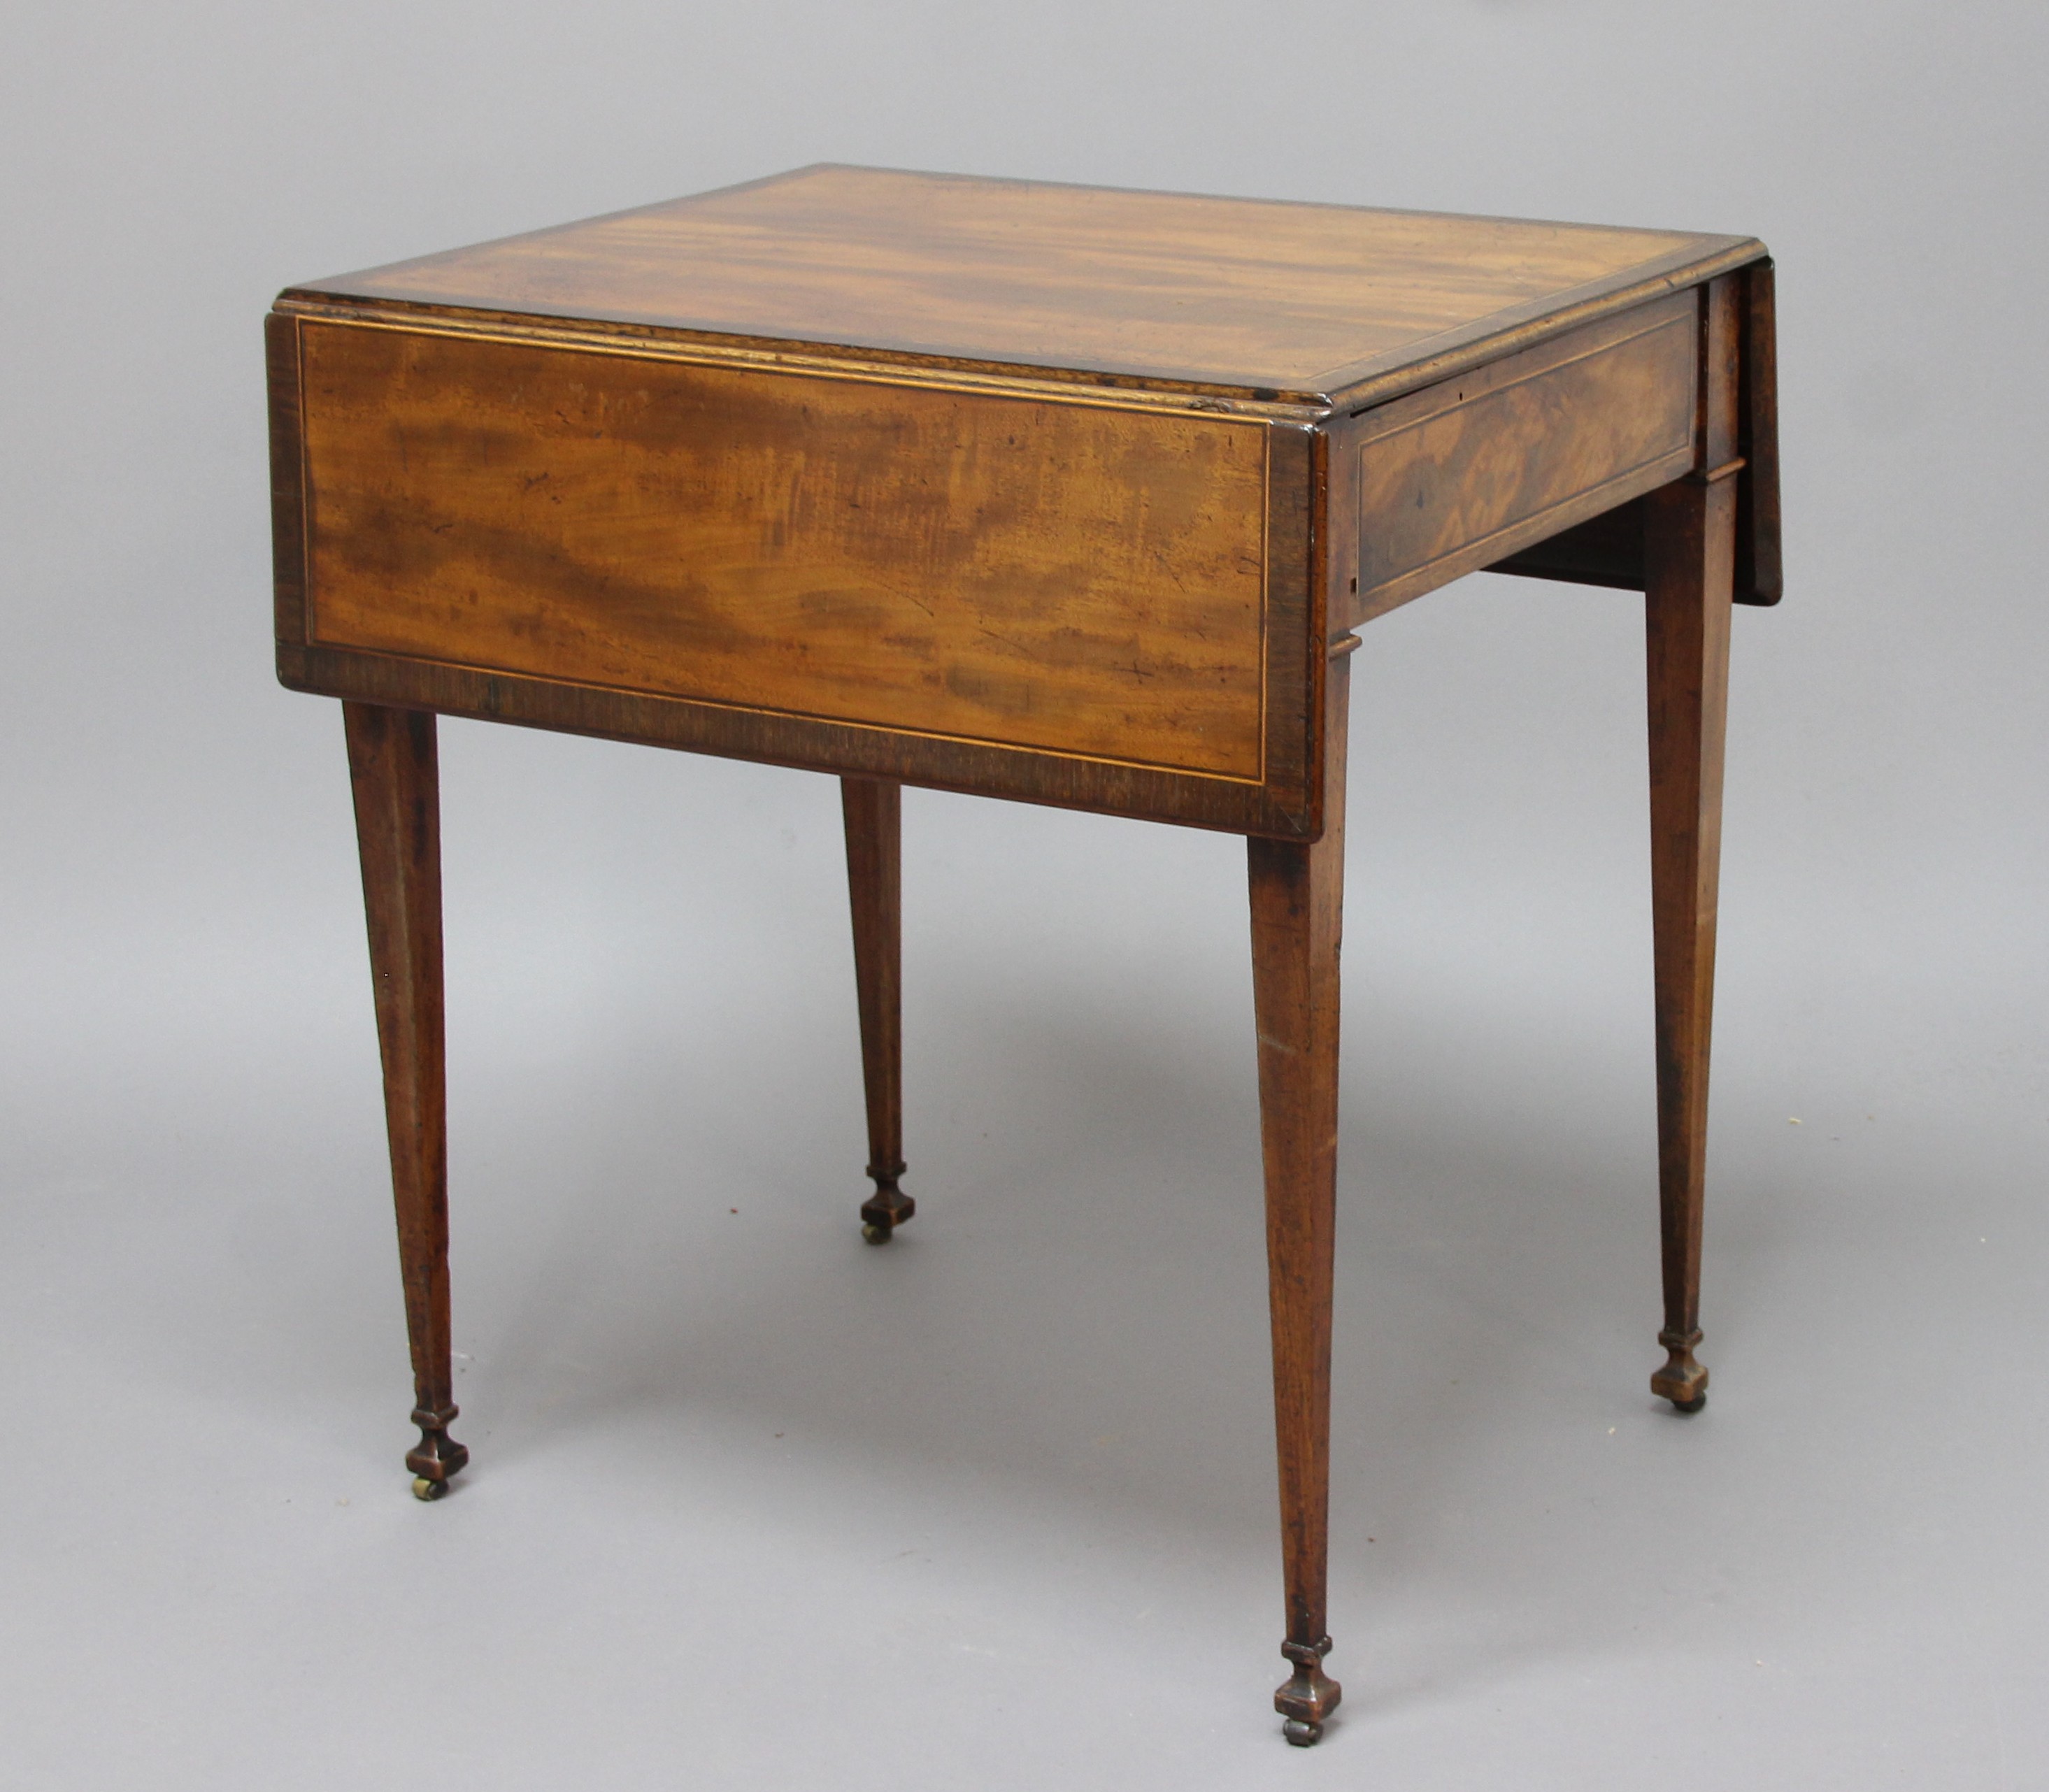 GEORGE III MAHOGANY AND THUYA CROSSBANDED PEMBROKE TABLE, circa 1770, in the manner of Thomas